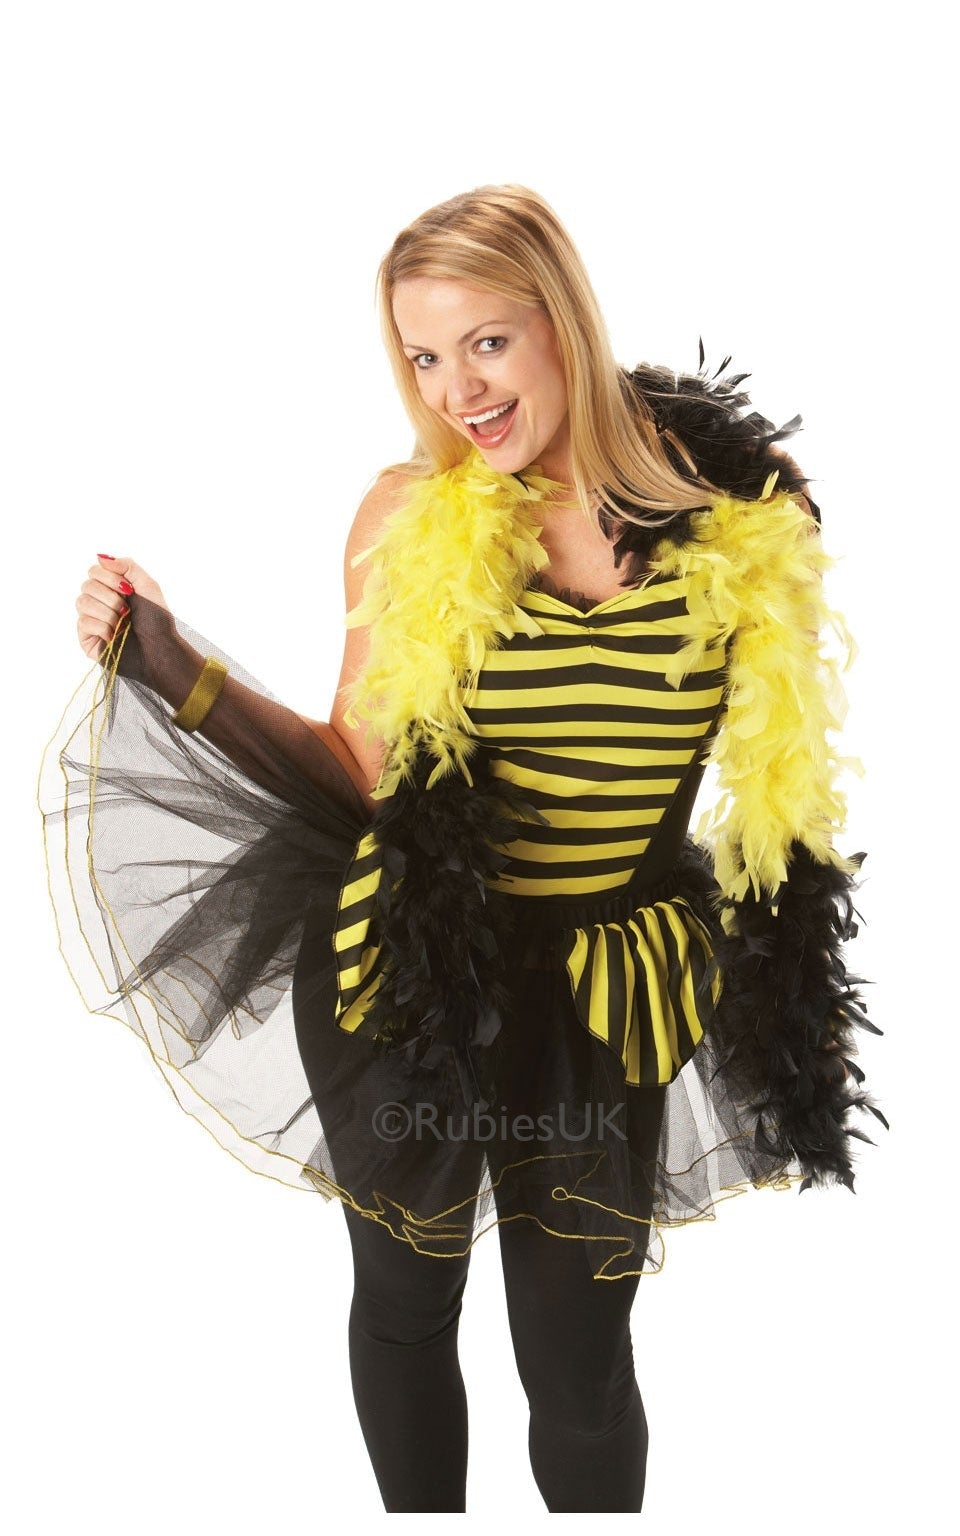 Bumblebee Basque Top Yellow and White Ladies Costume_1